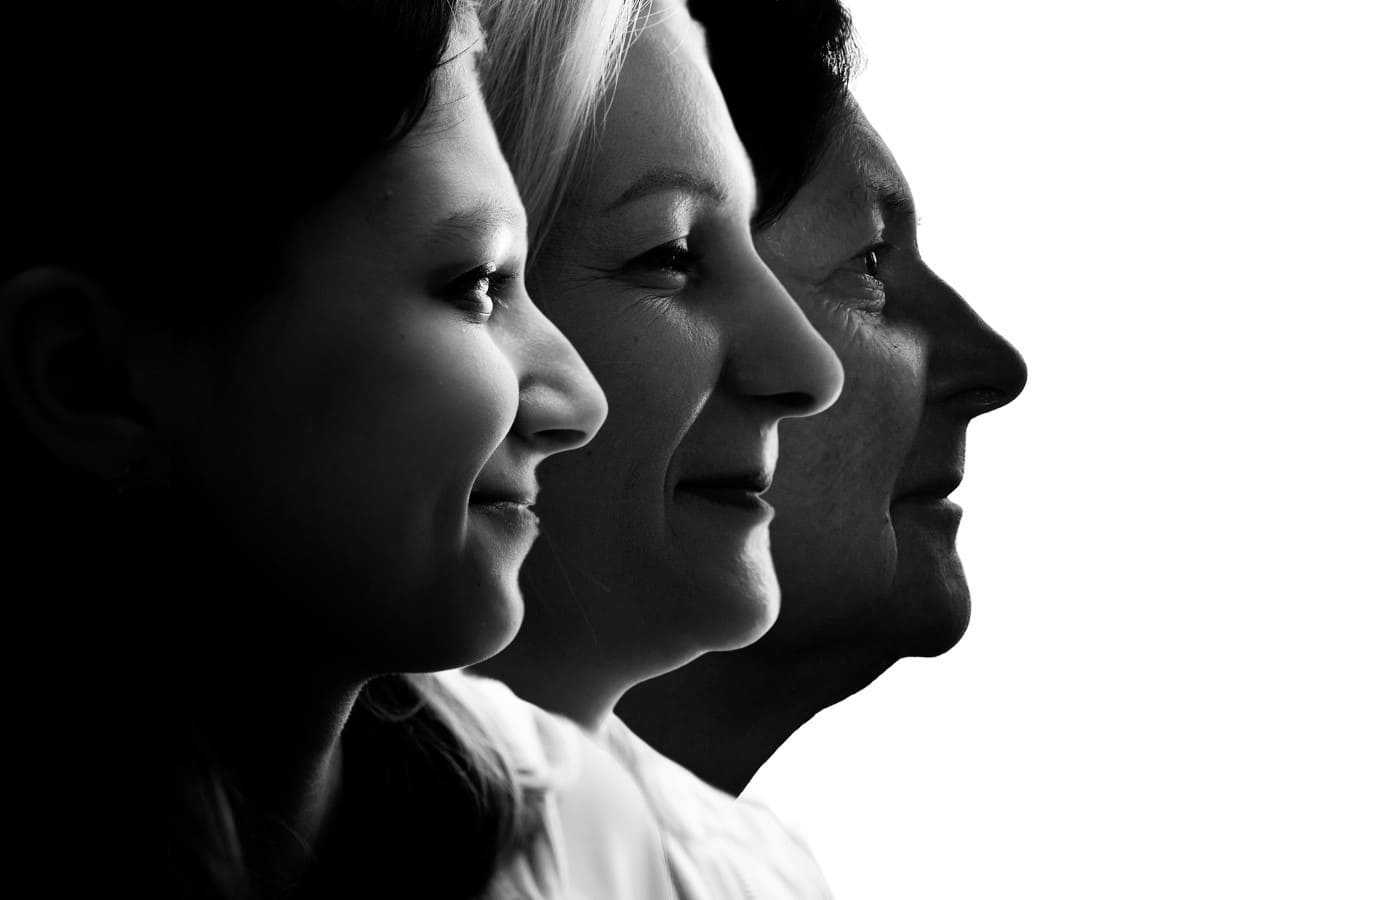 Black and white portraits of family portrait of three generations of women